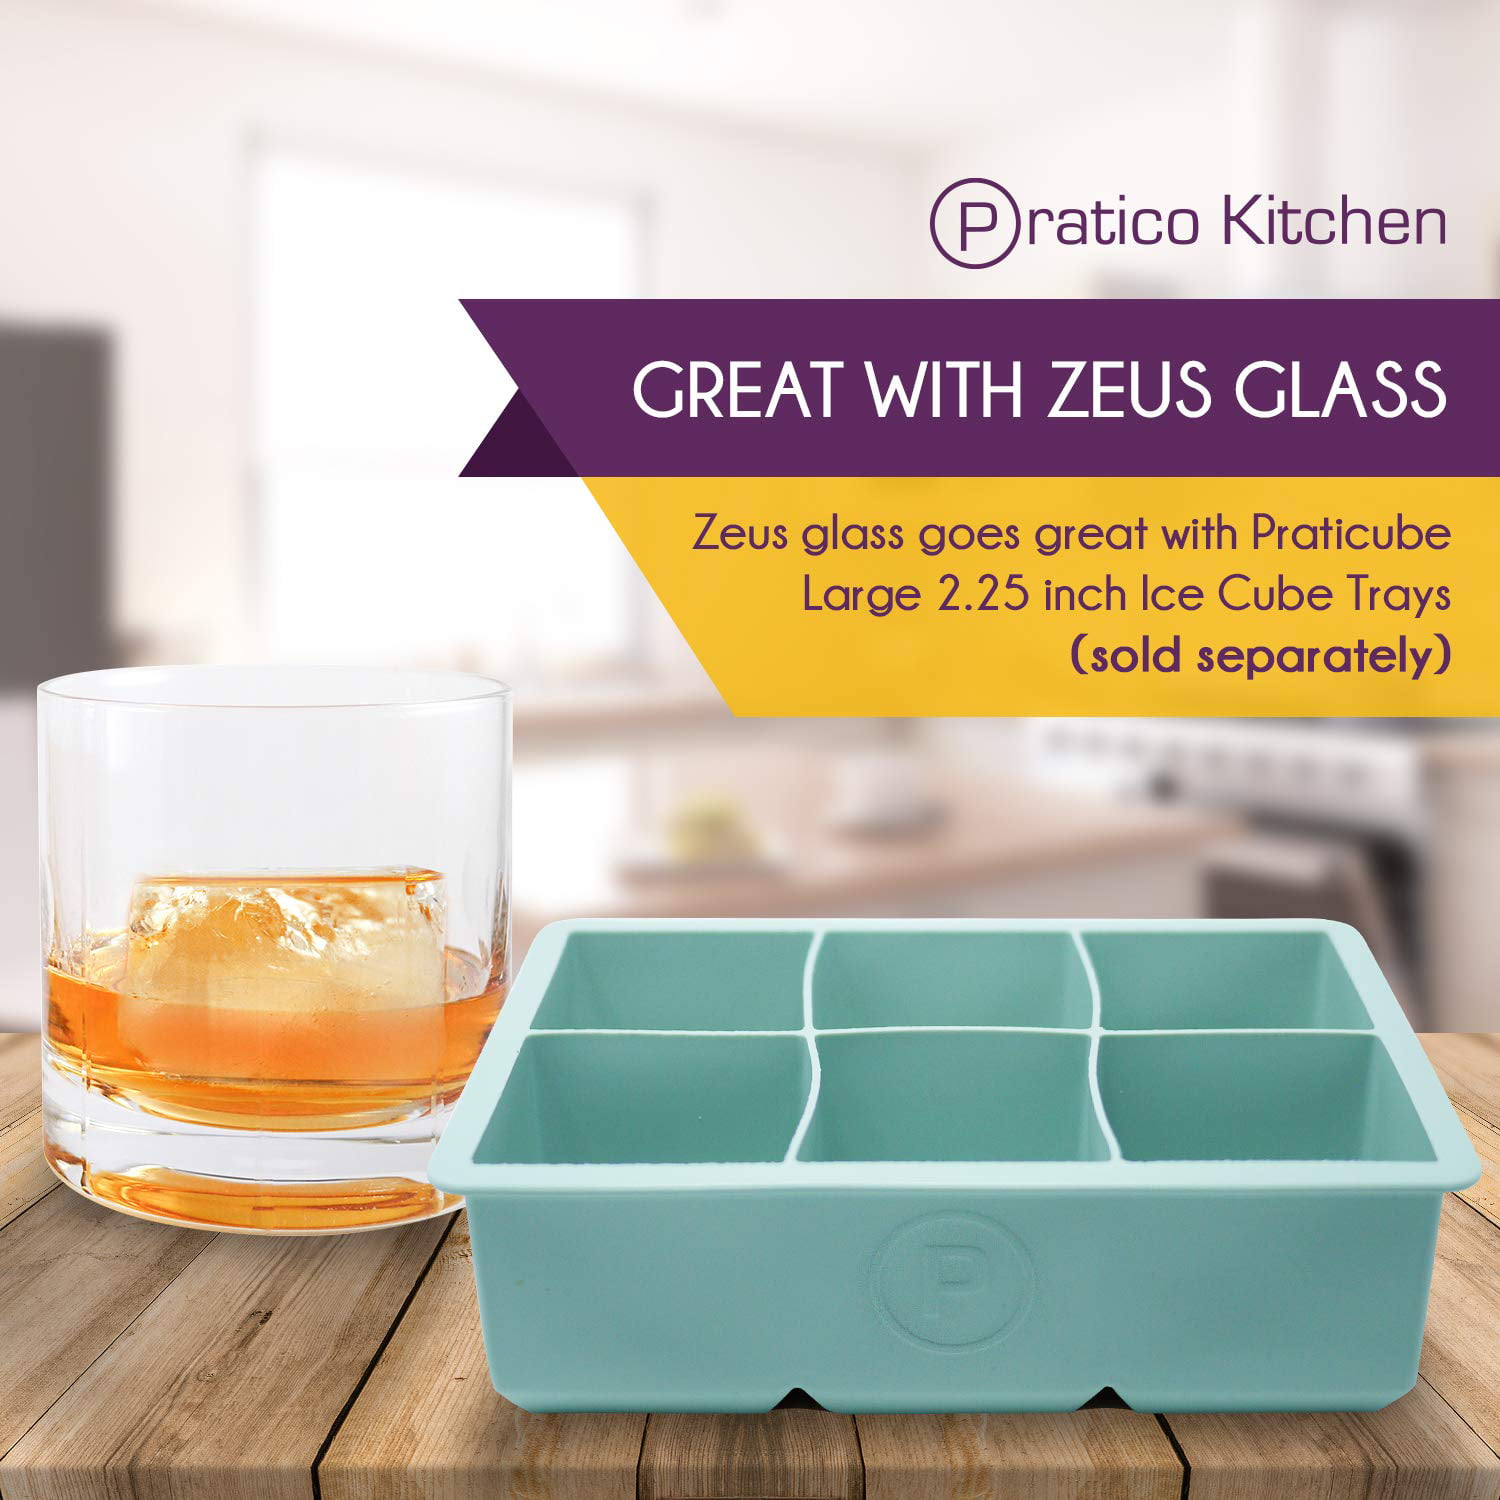 Large Ice Cube Mold Makes 4 Big Ice Cubes Keep Drinks Chilled with  Praticube Large Ice Cube Tray - CPCW0037SG - IdeaStage Promotional Products